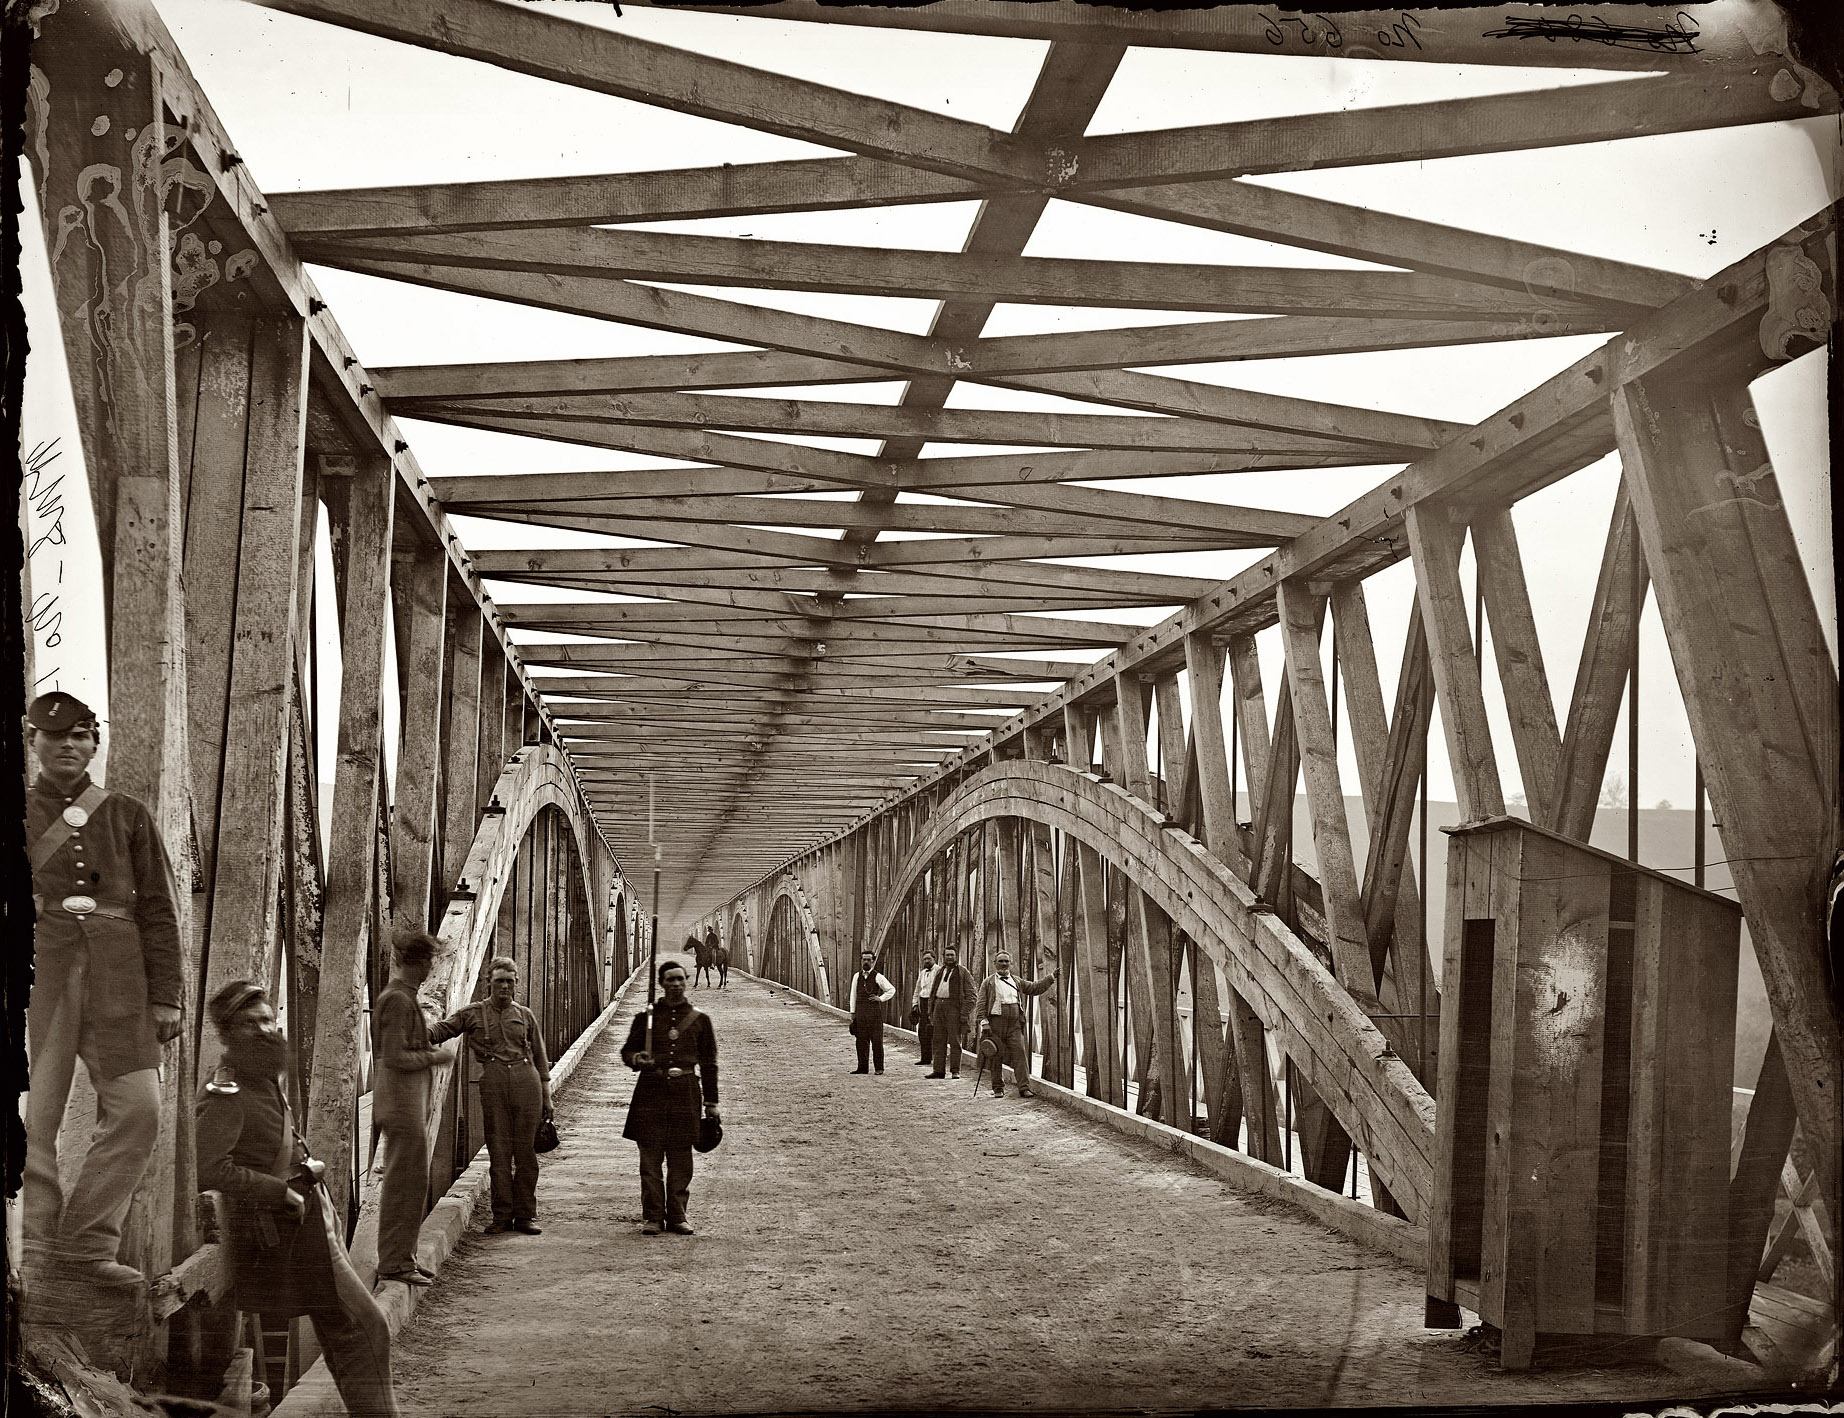 View down the Chain Bridge over the Potomac near Washington circa 1865. Wet collodion glass plate negative by William Morris Smith. View full size.